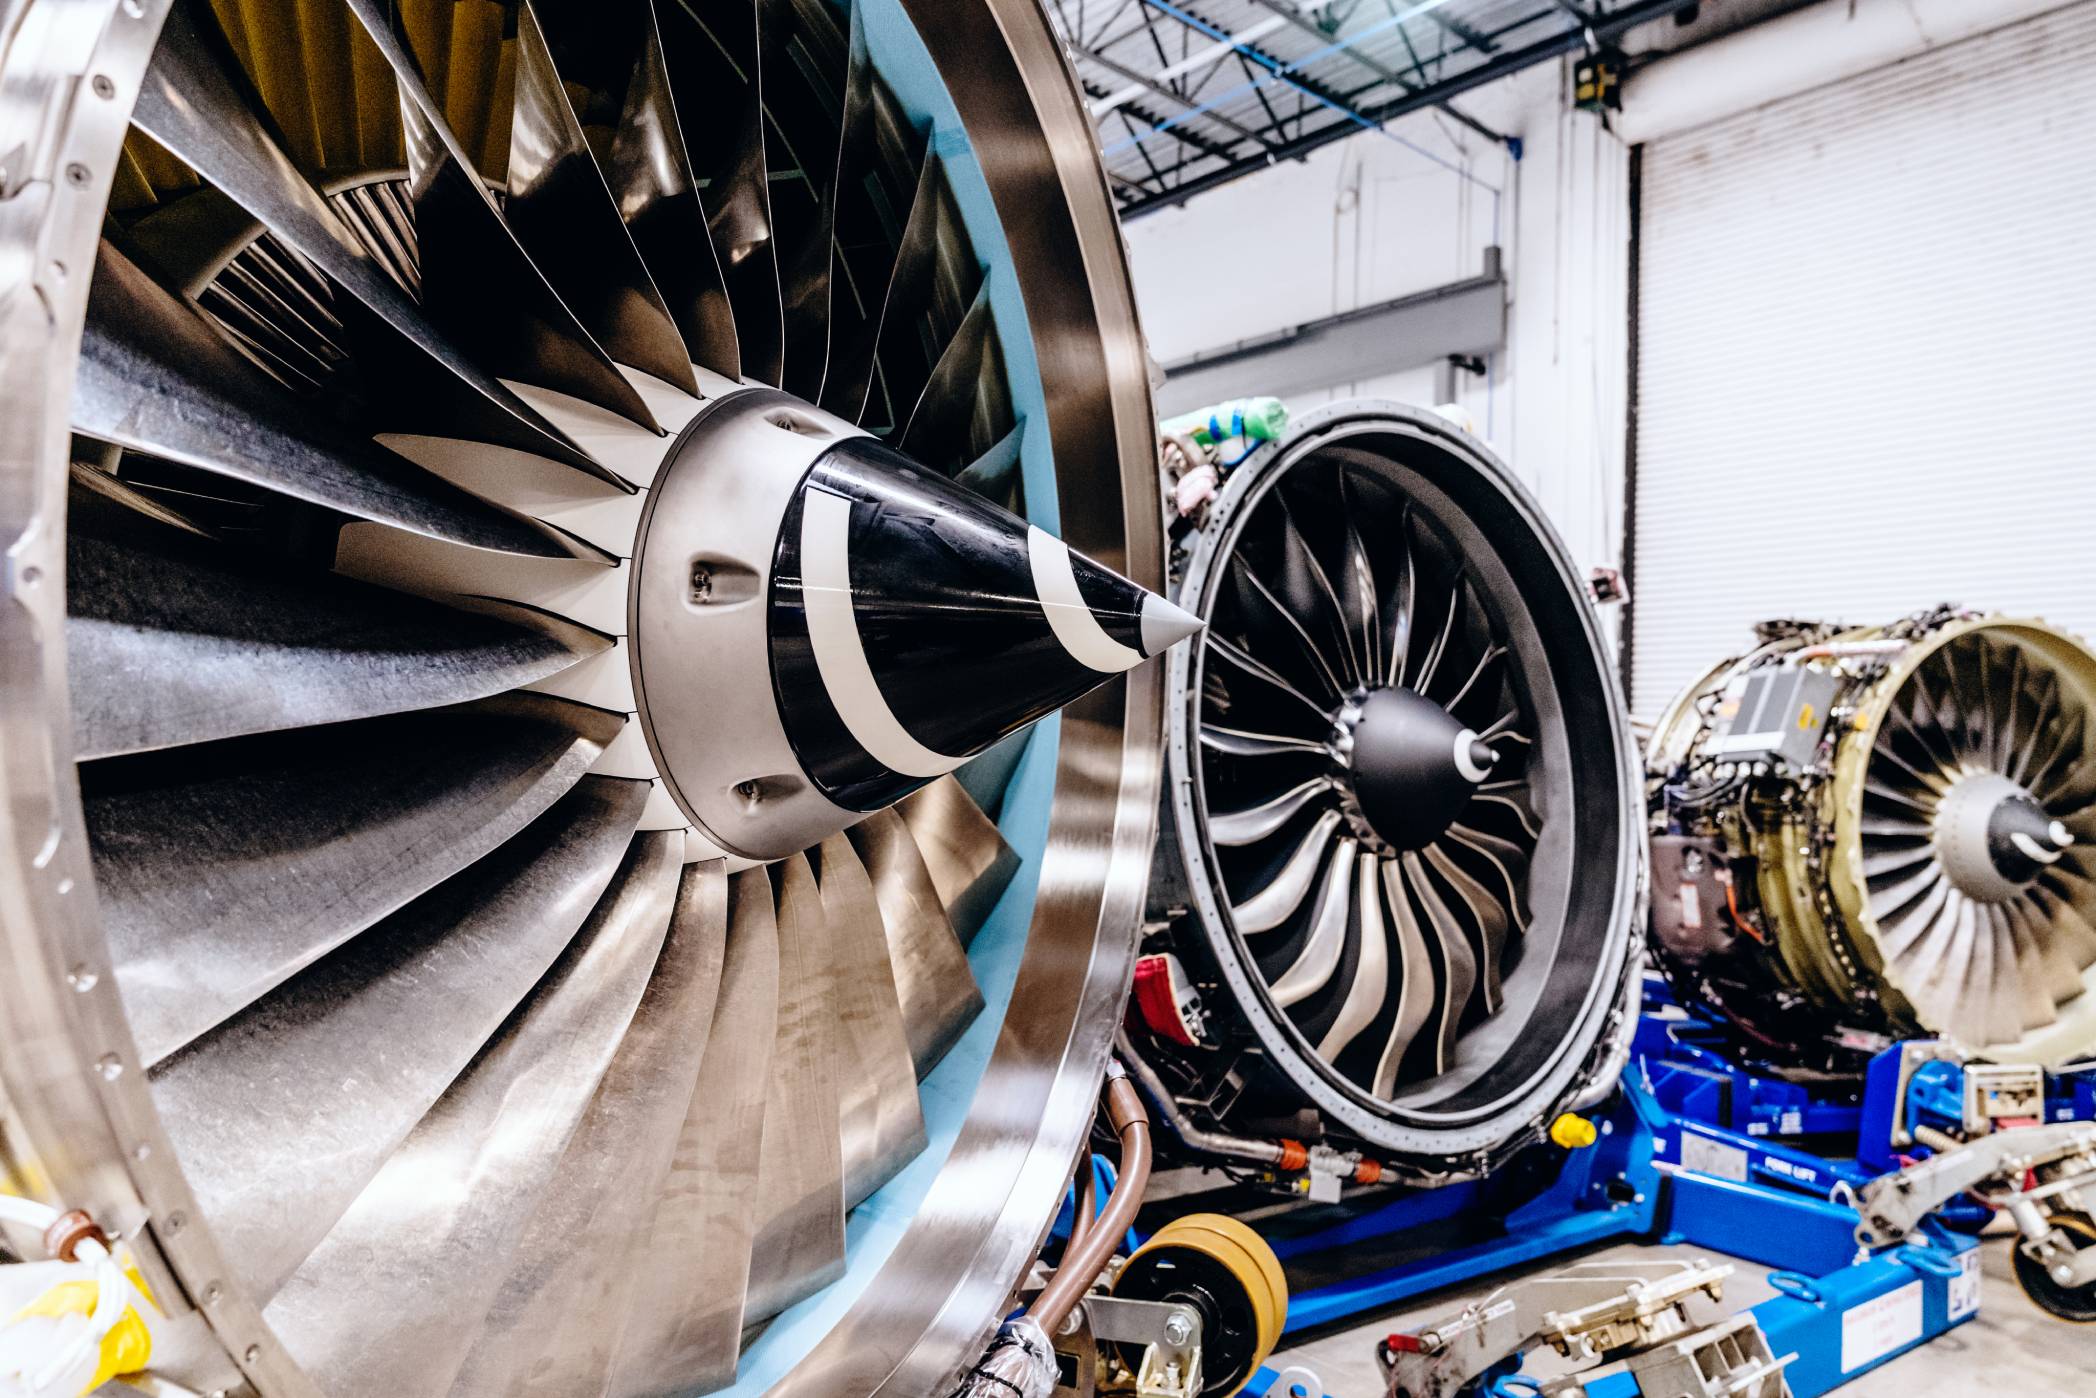 Multiple jet engines on engine stands highlight the extensive Willis engine inventory ready to work for your aircraft today